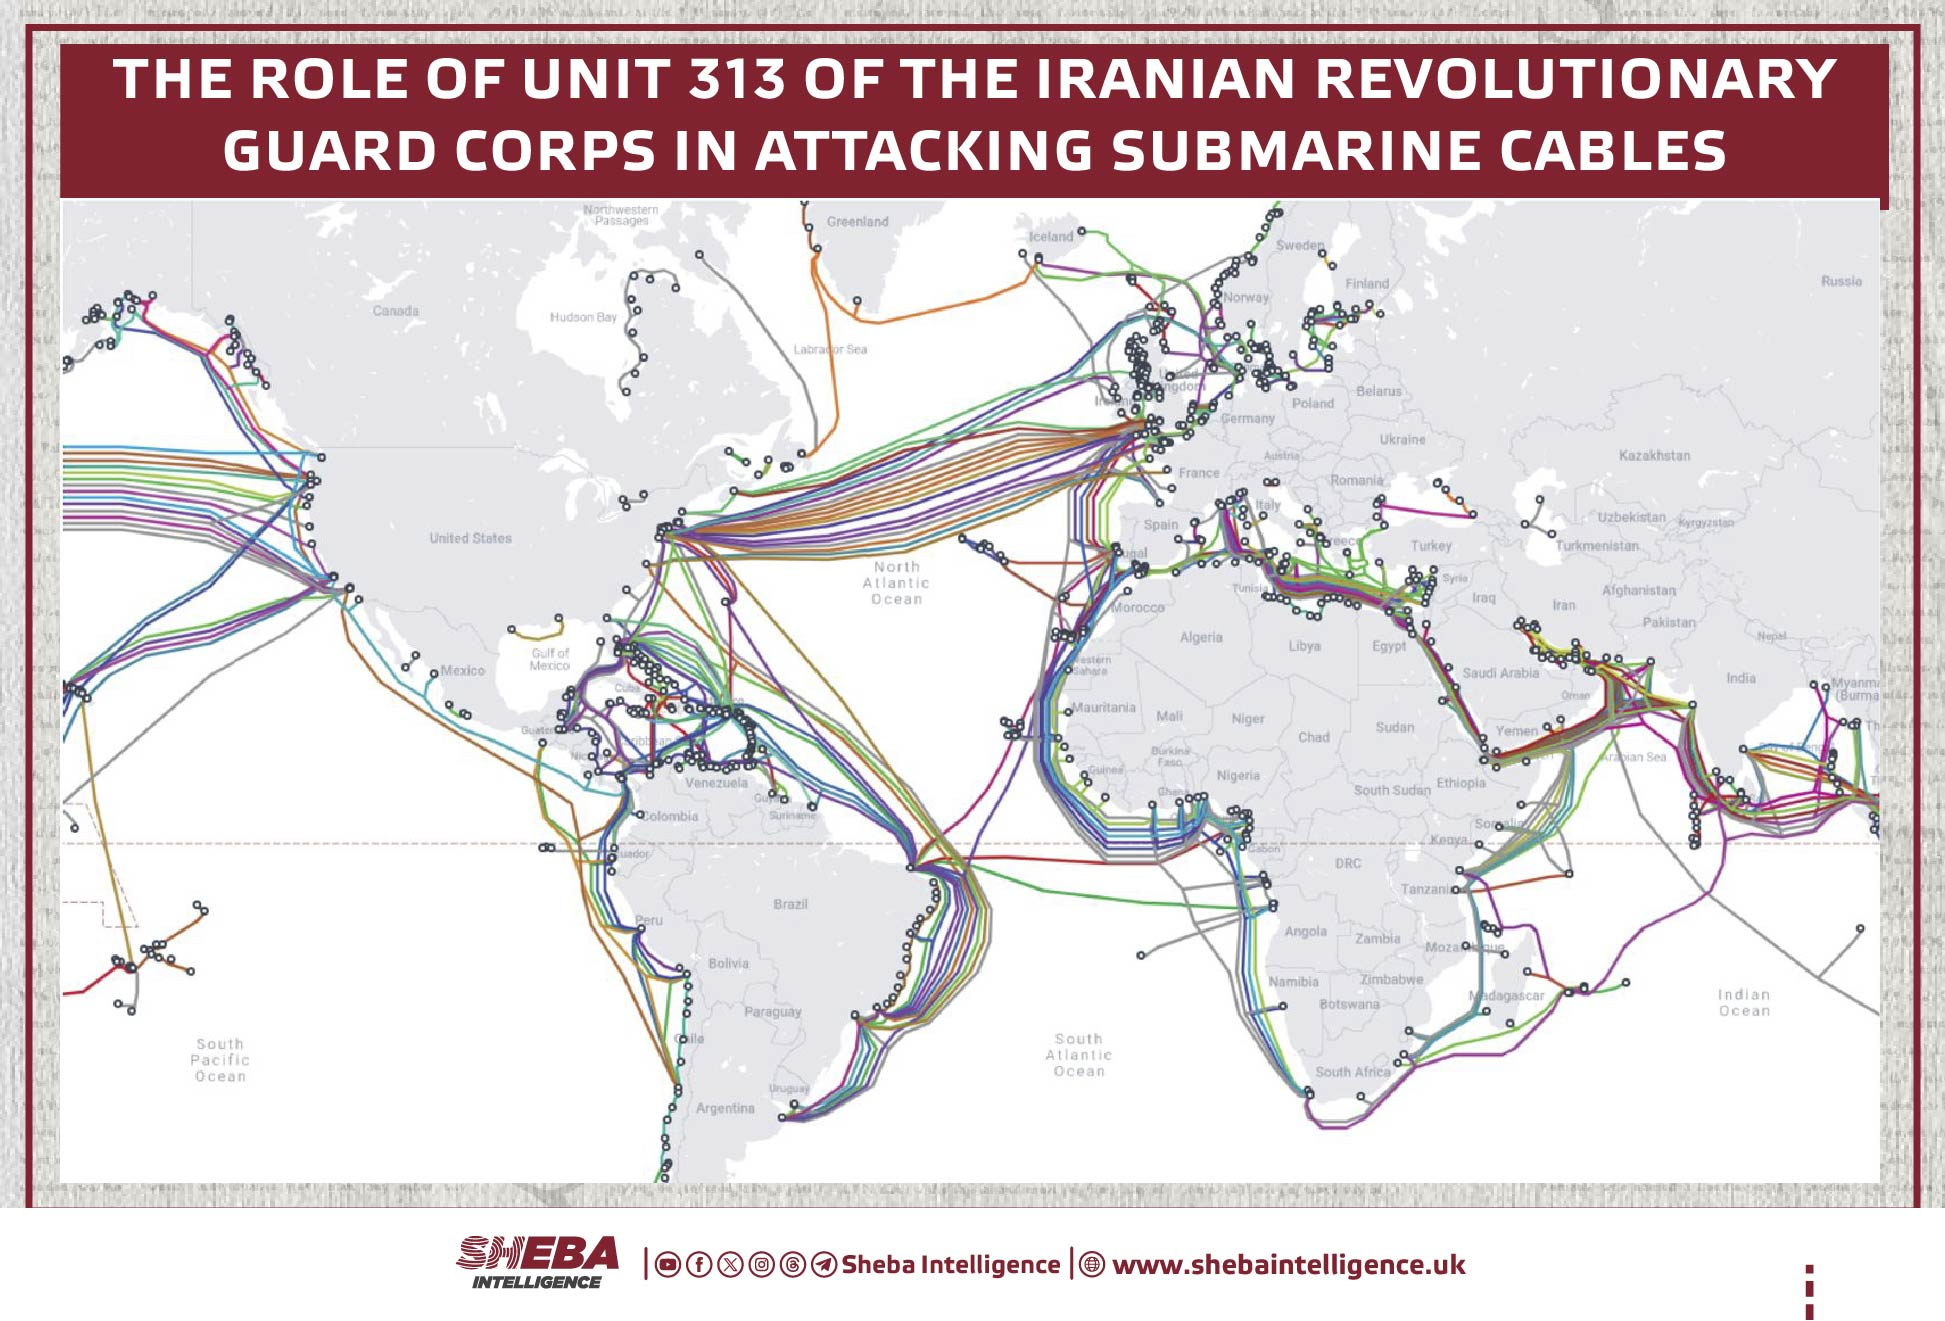 The Role of Unit 313 of the Iranian Revolutionary Guard Corps in Attacking Submarine Cables